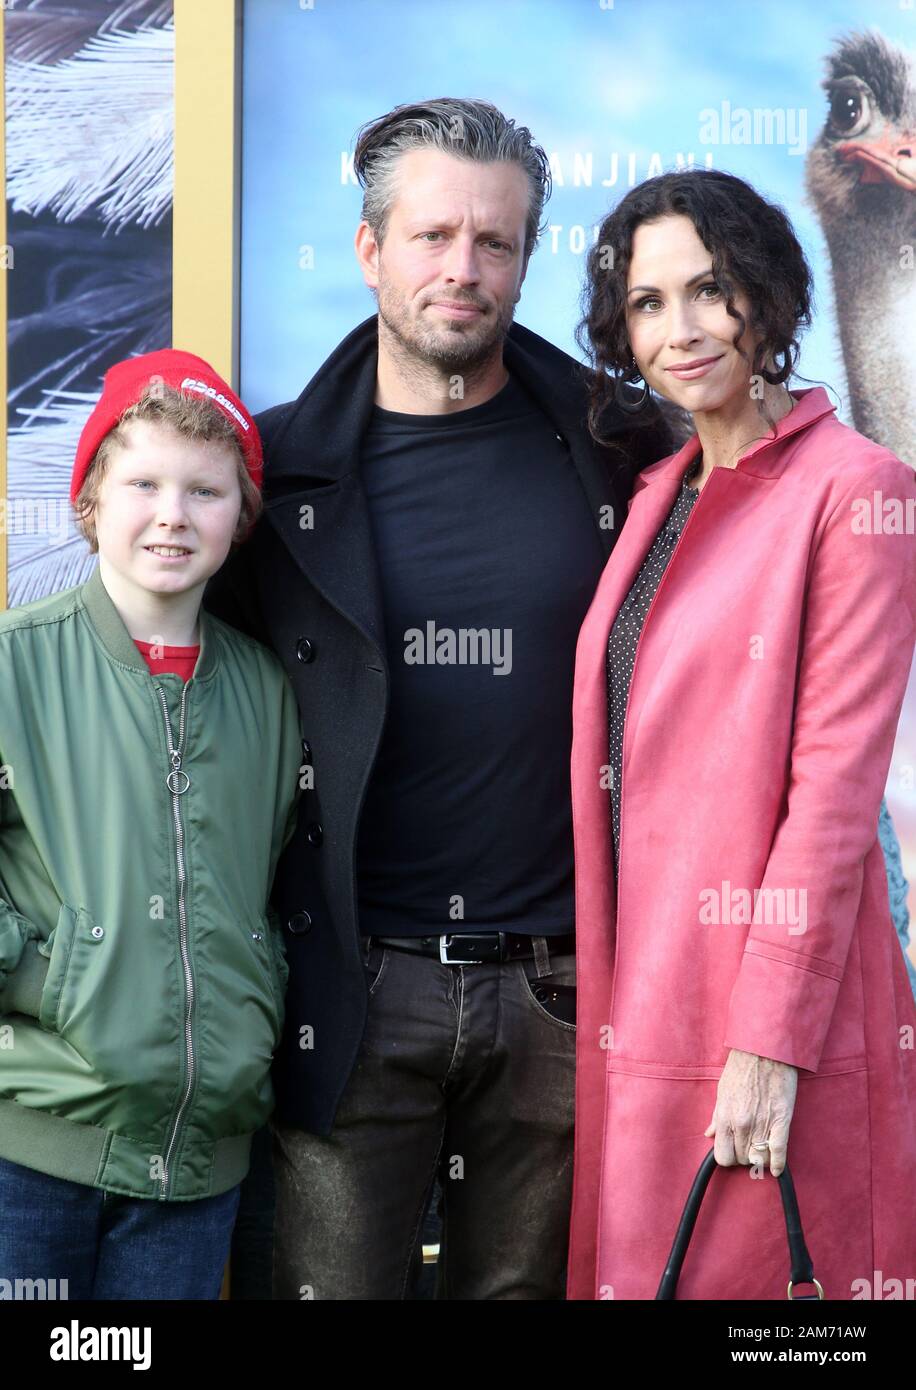 Los Angeles, Ca. 11th Jan, 2020. Minnie Driver, Addison O'Dea, Henry Driver, at the premiere of Universal Pictures' Dolittle at the Regency Village Theatre in Los Angeles, California on January 11, 2020. Credit: Faye Sadou/Media Punch/Alamy Live News Stock Photo